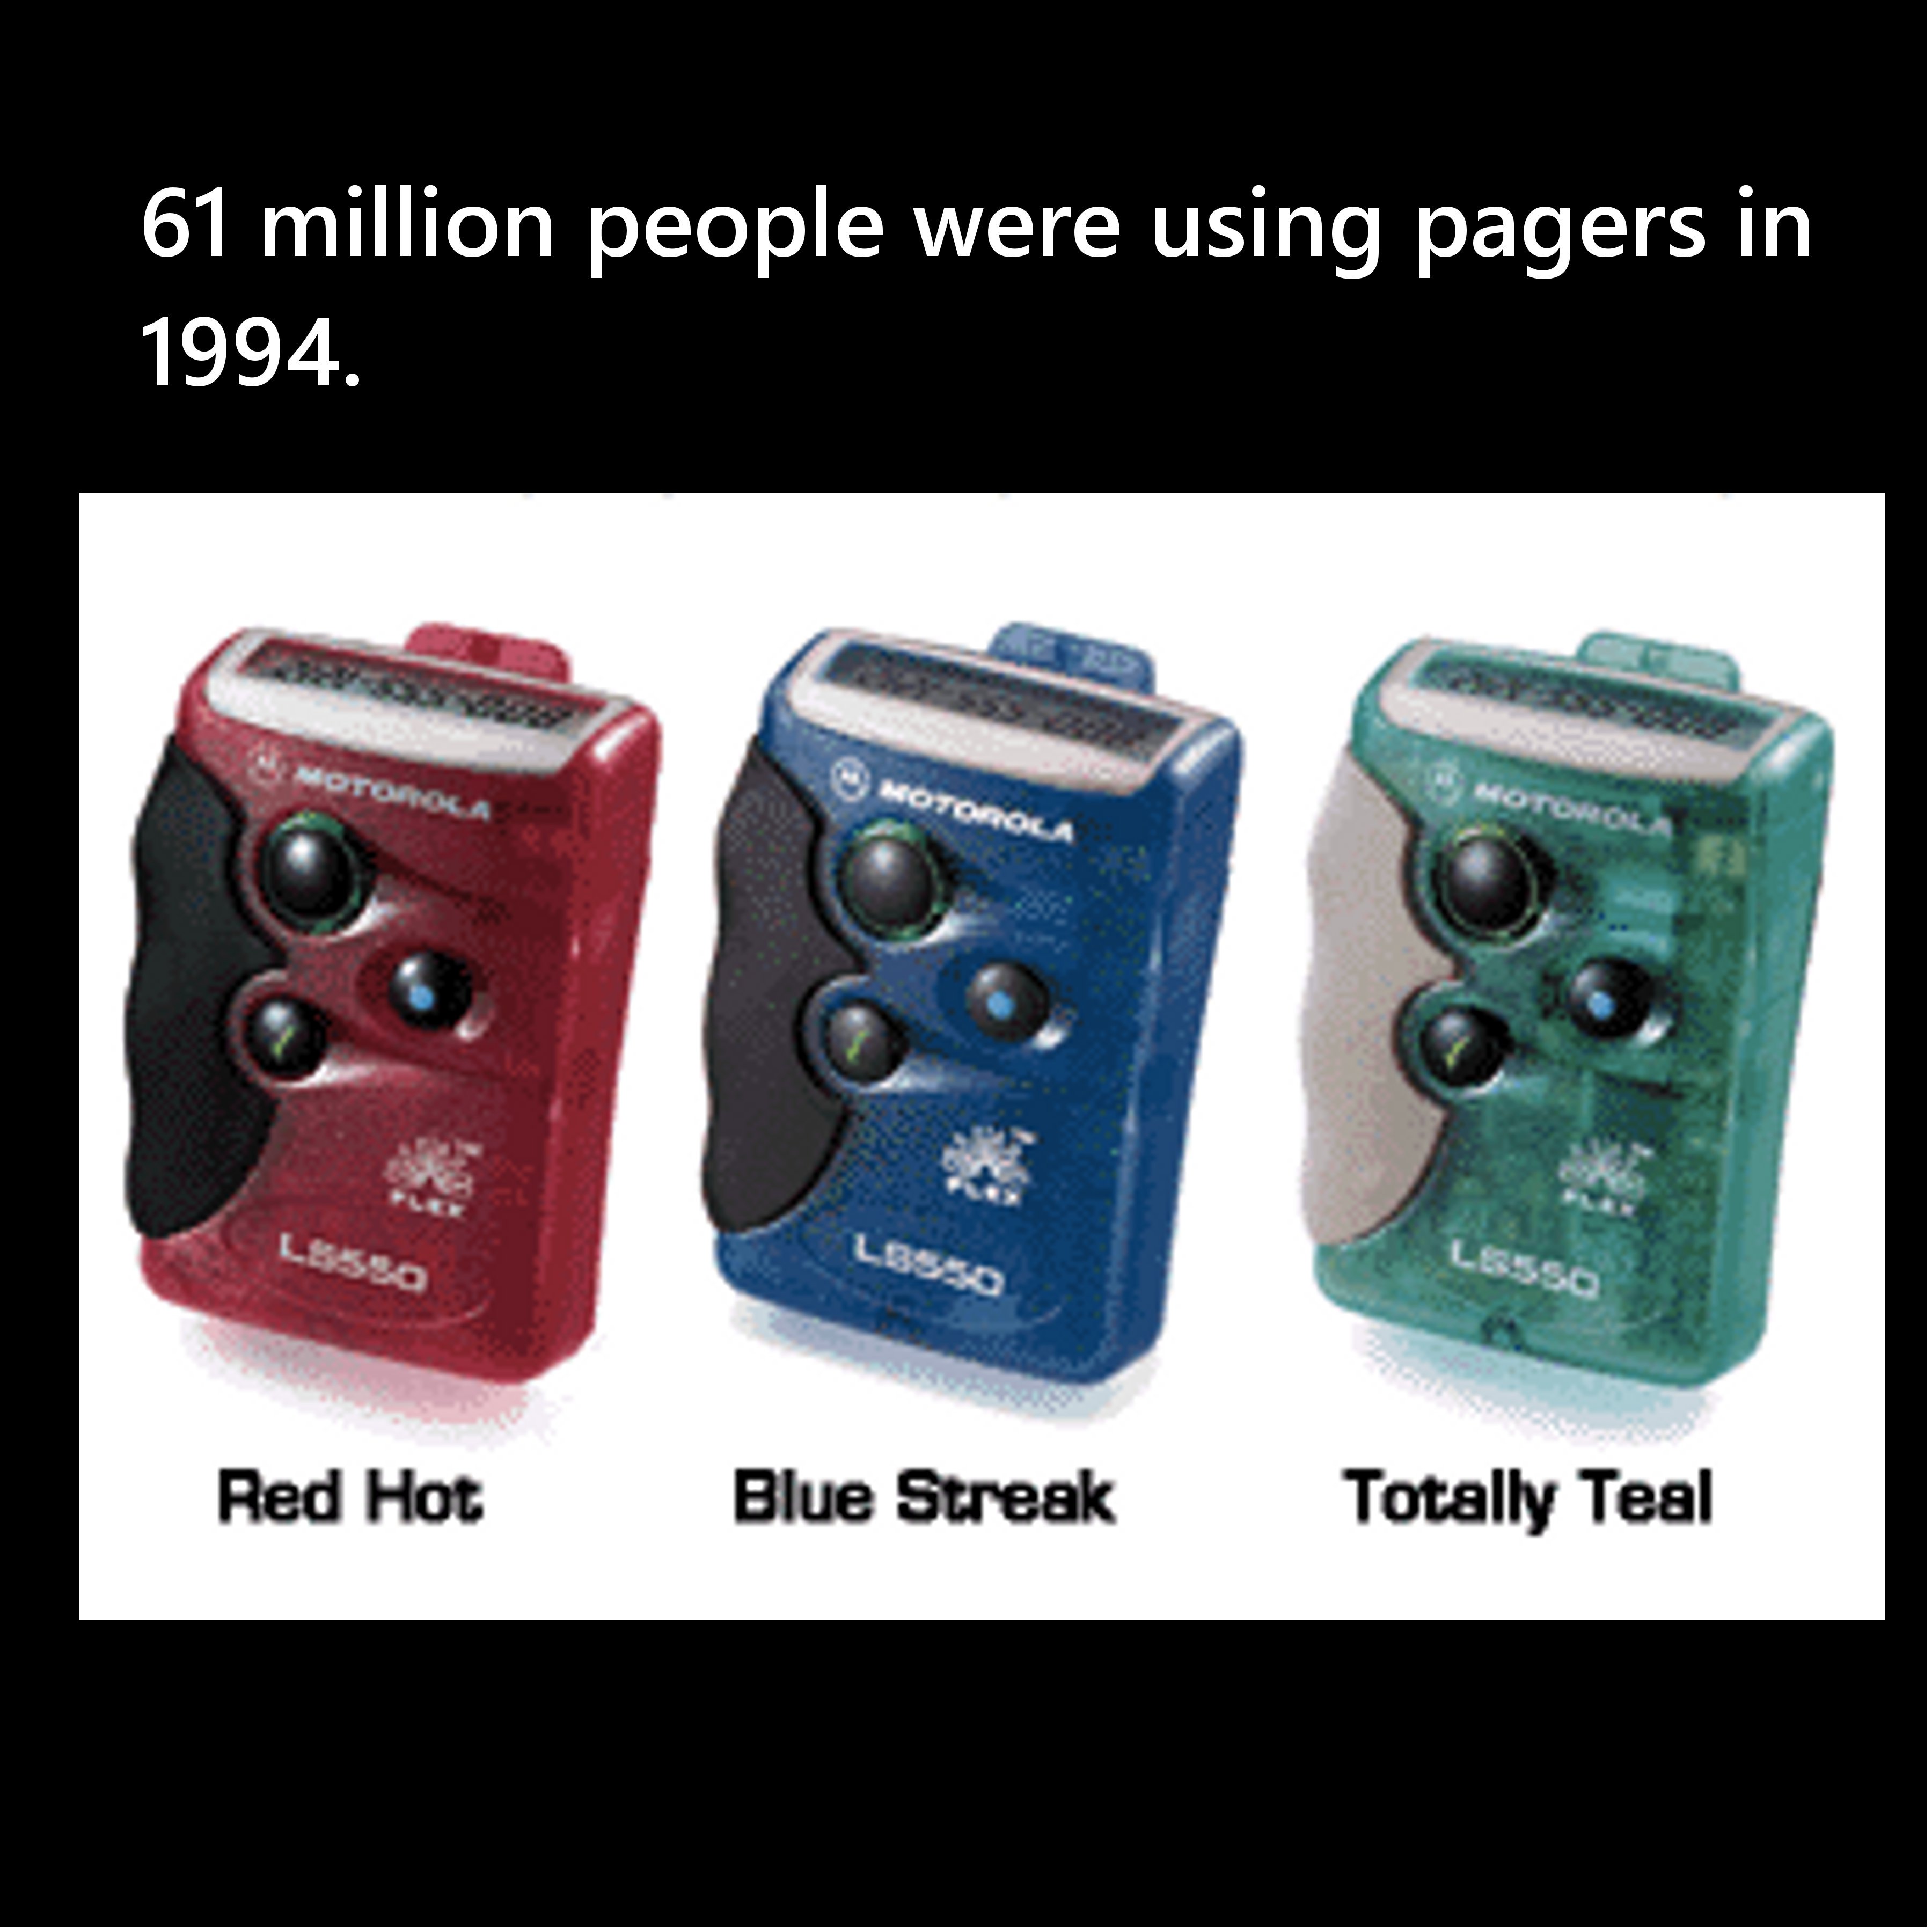 90s teen pager - 61 million people were using pagers in 1994. Motorola Motorola Motor Lass Lesso Lesso Red Hot Blue Streak Totally Teal